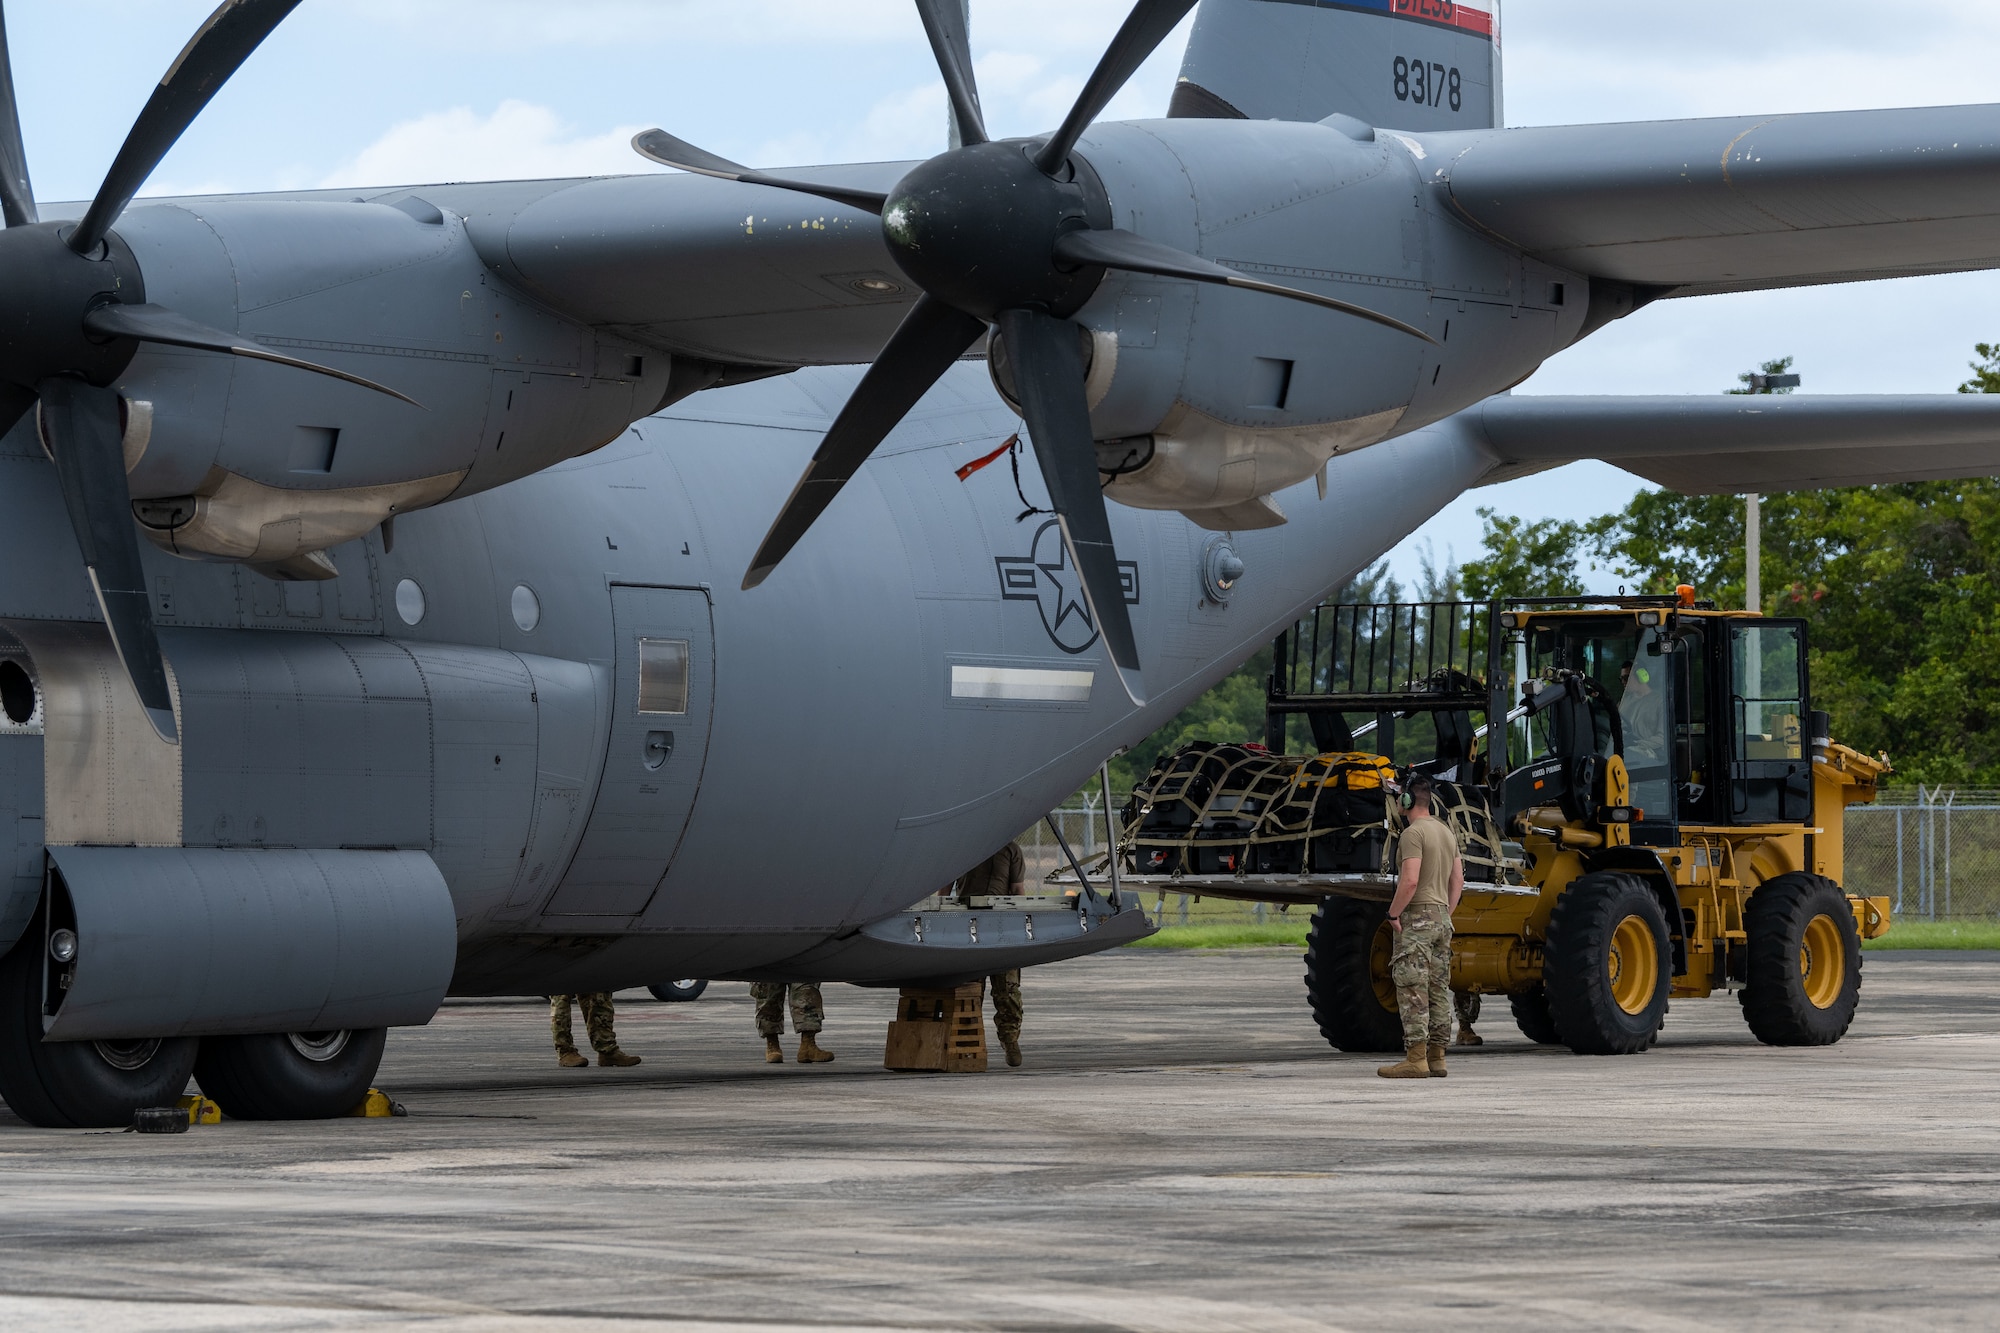 U.S. Airmen load cargo onto a C-130J Super Hercules assigned to the 317th Airlift Wing, Dyess Air Force Base, at Muniz Air National Guard Base, Carolina, Puerto Rico, Feb. 21, 2023. The Puerto Rico Air National Guard provided logistical support, command and control, airfield operations support and hangar space during Operation Forward Tiger exercise, which provides joint training and improves readiness of U.S. and partner nation military personnel through interoperability training. (U.S. Air National Guard photo by Airman 1st Class Gisselle Toro)